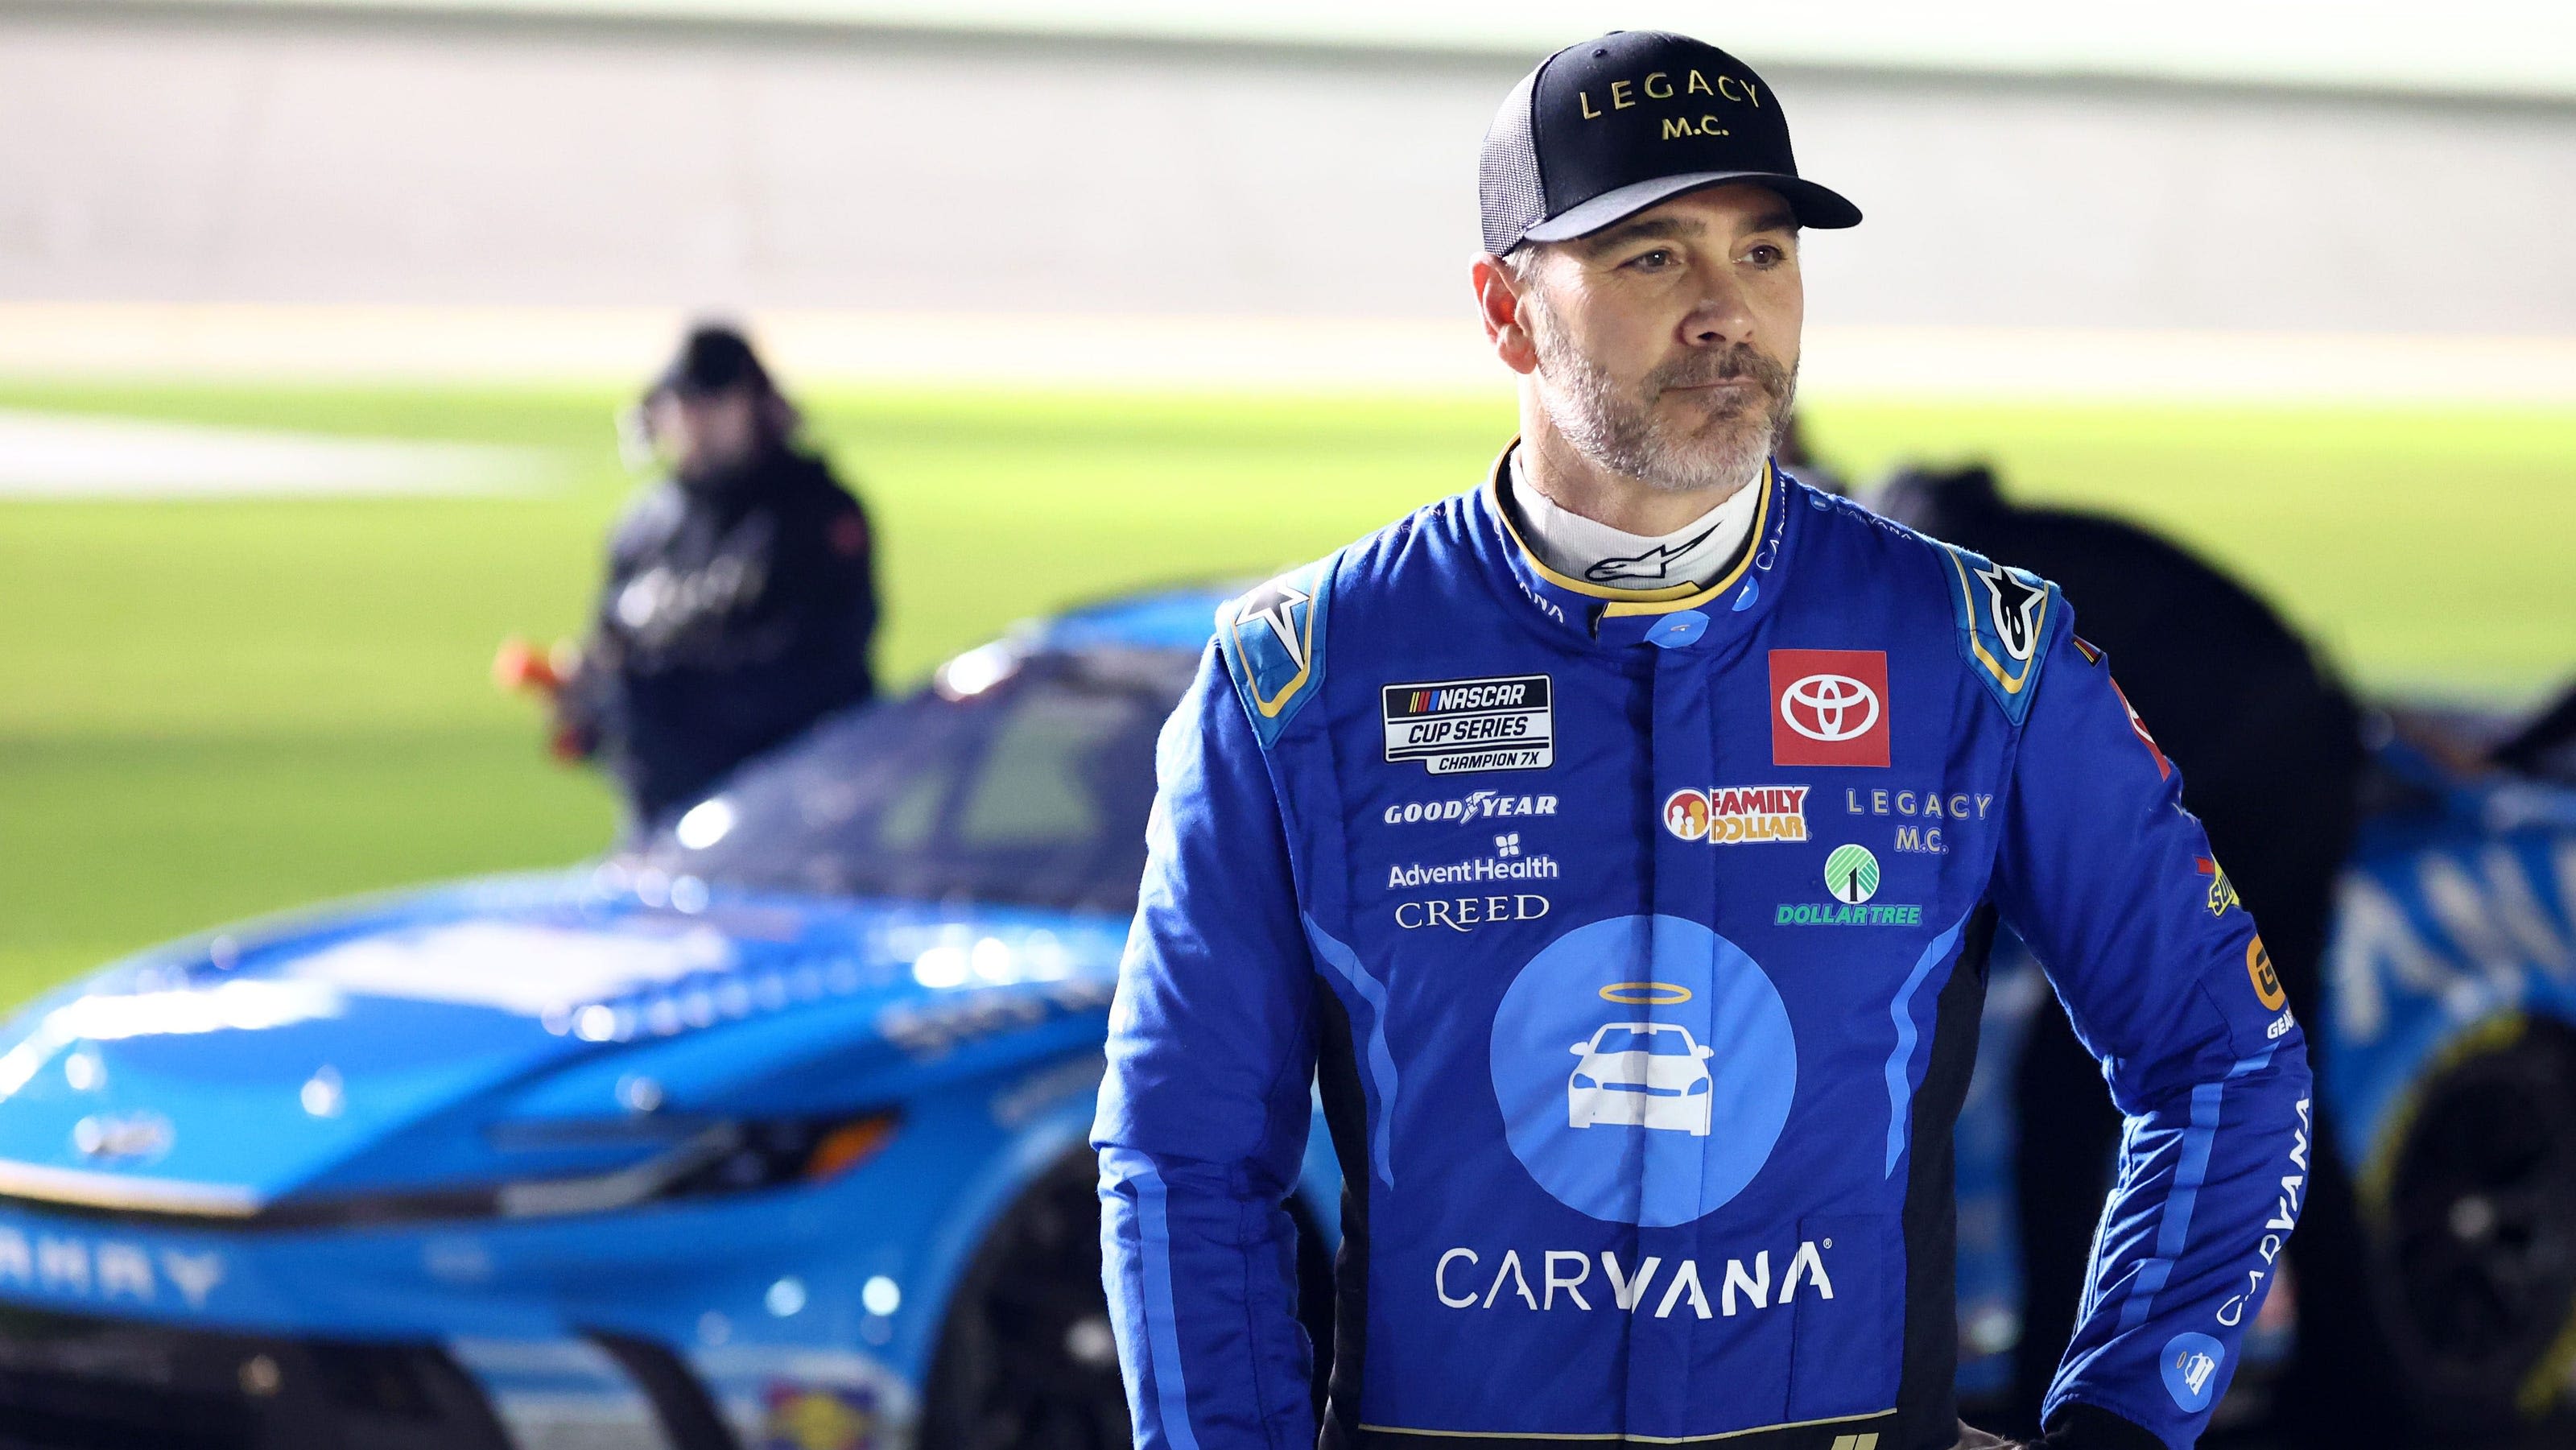 Jimmie Johnson will be part of Indianapolis 500 broadcast, drive in NASCAR on same day